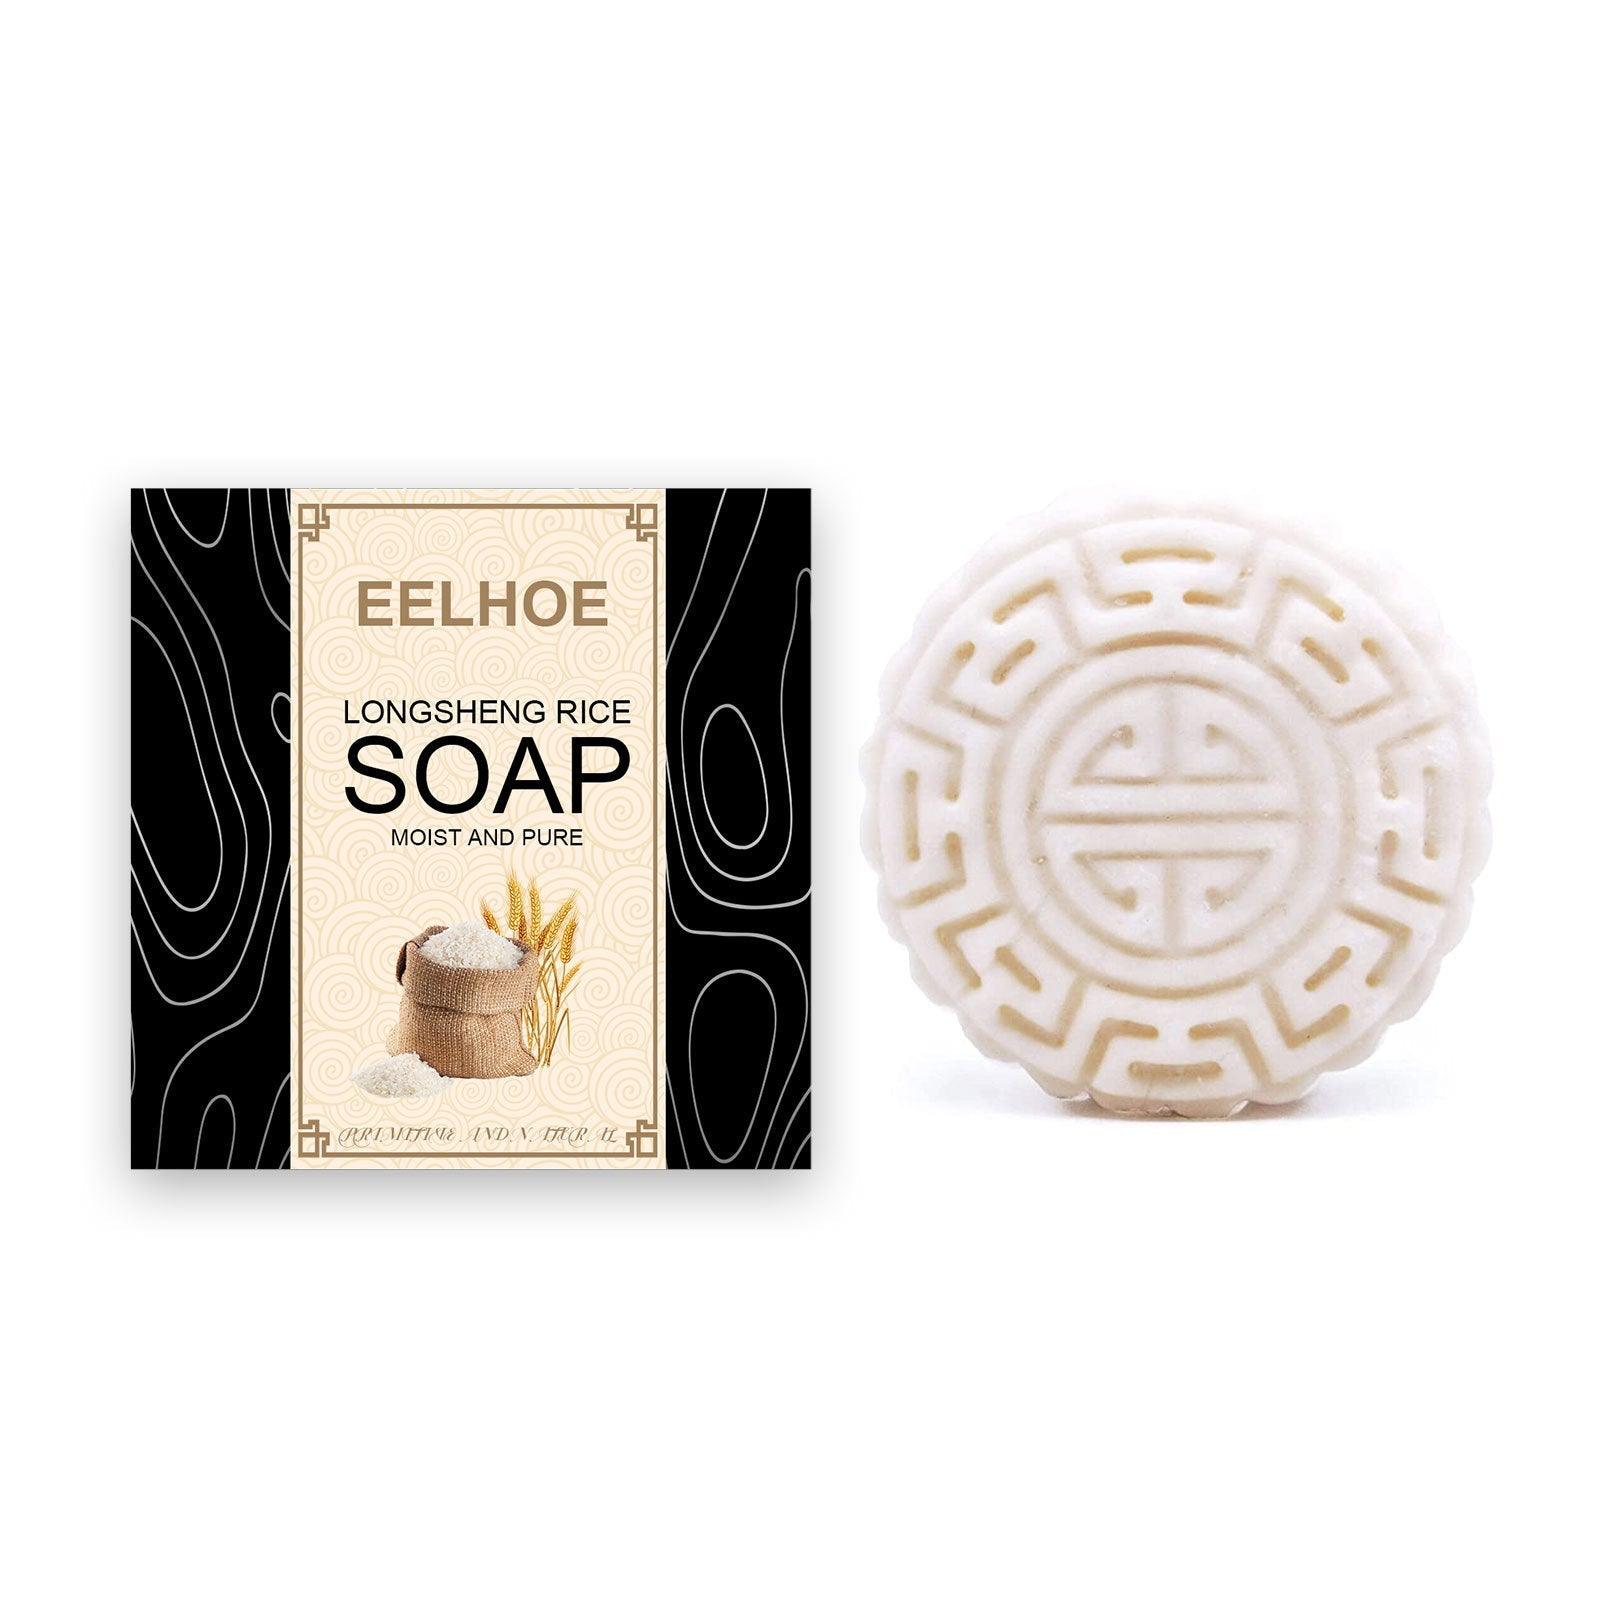 EELHOE Soap Shampoo Soap Nourishes Frizz, Conditioner And Softens Hair